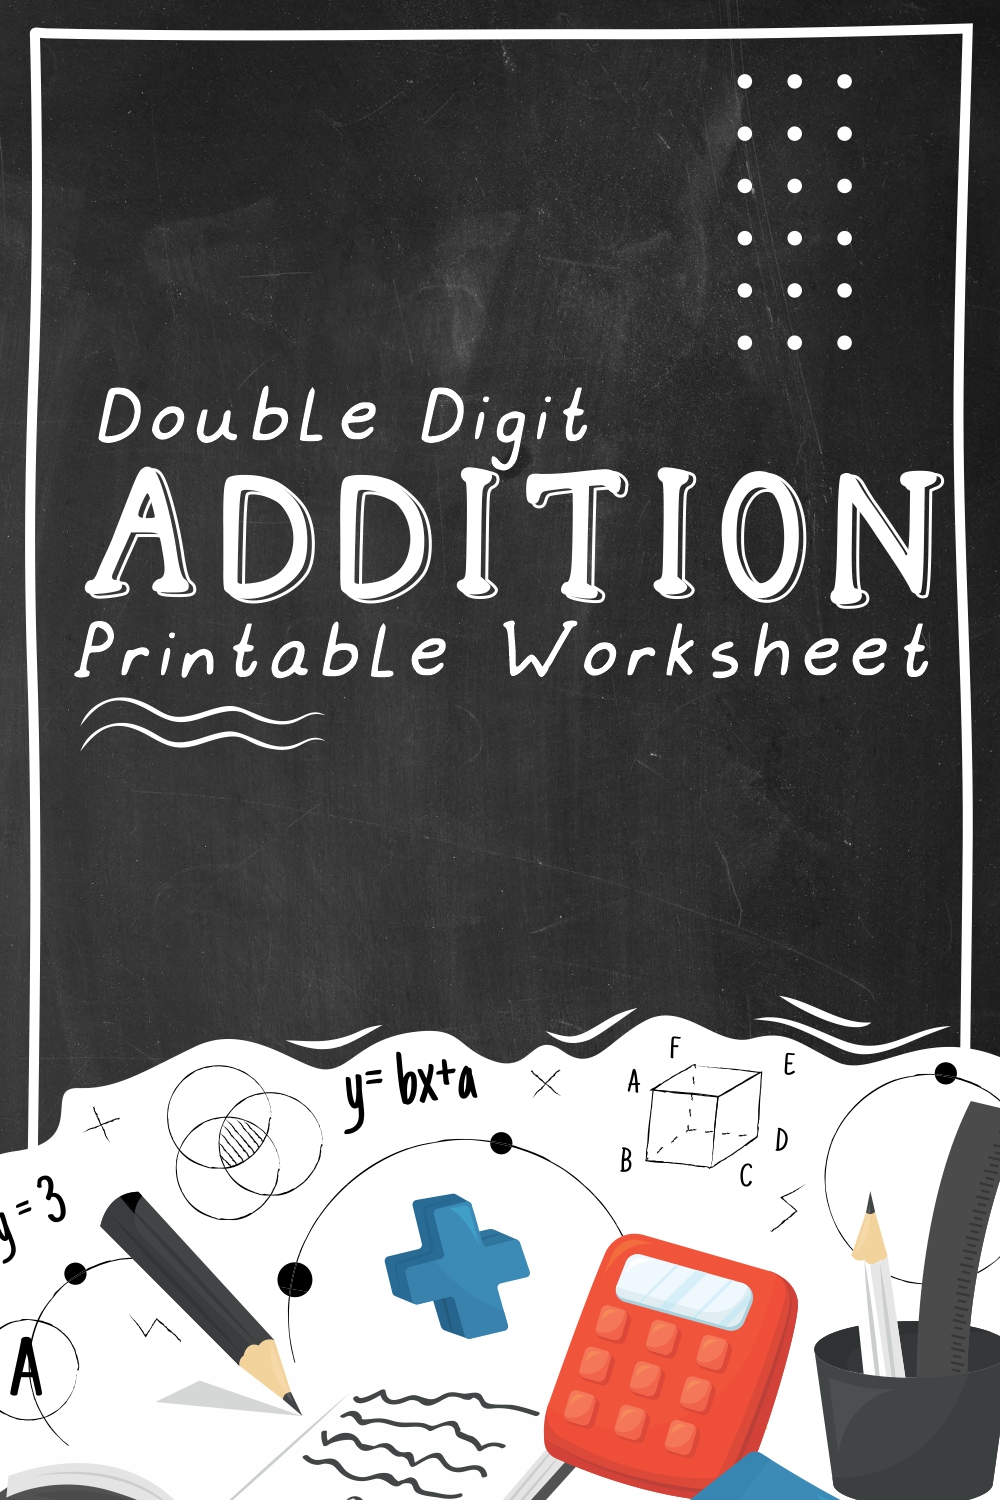 16 Images of Double- Digit Addition Printable Worksheets